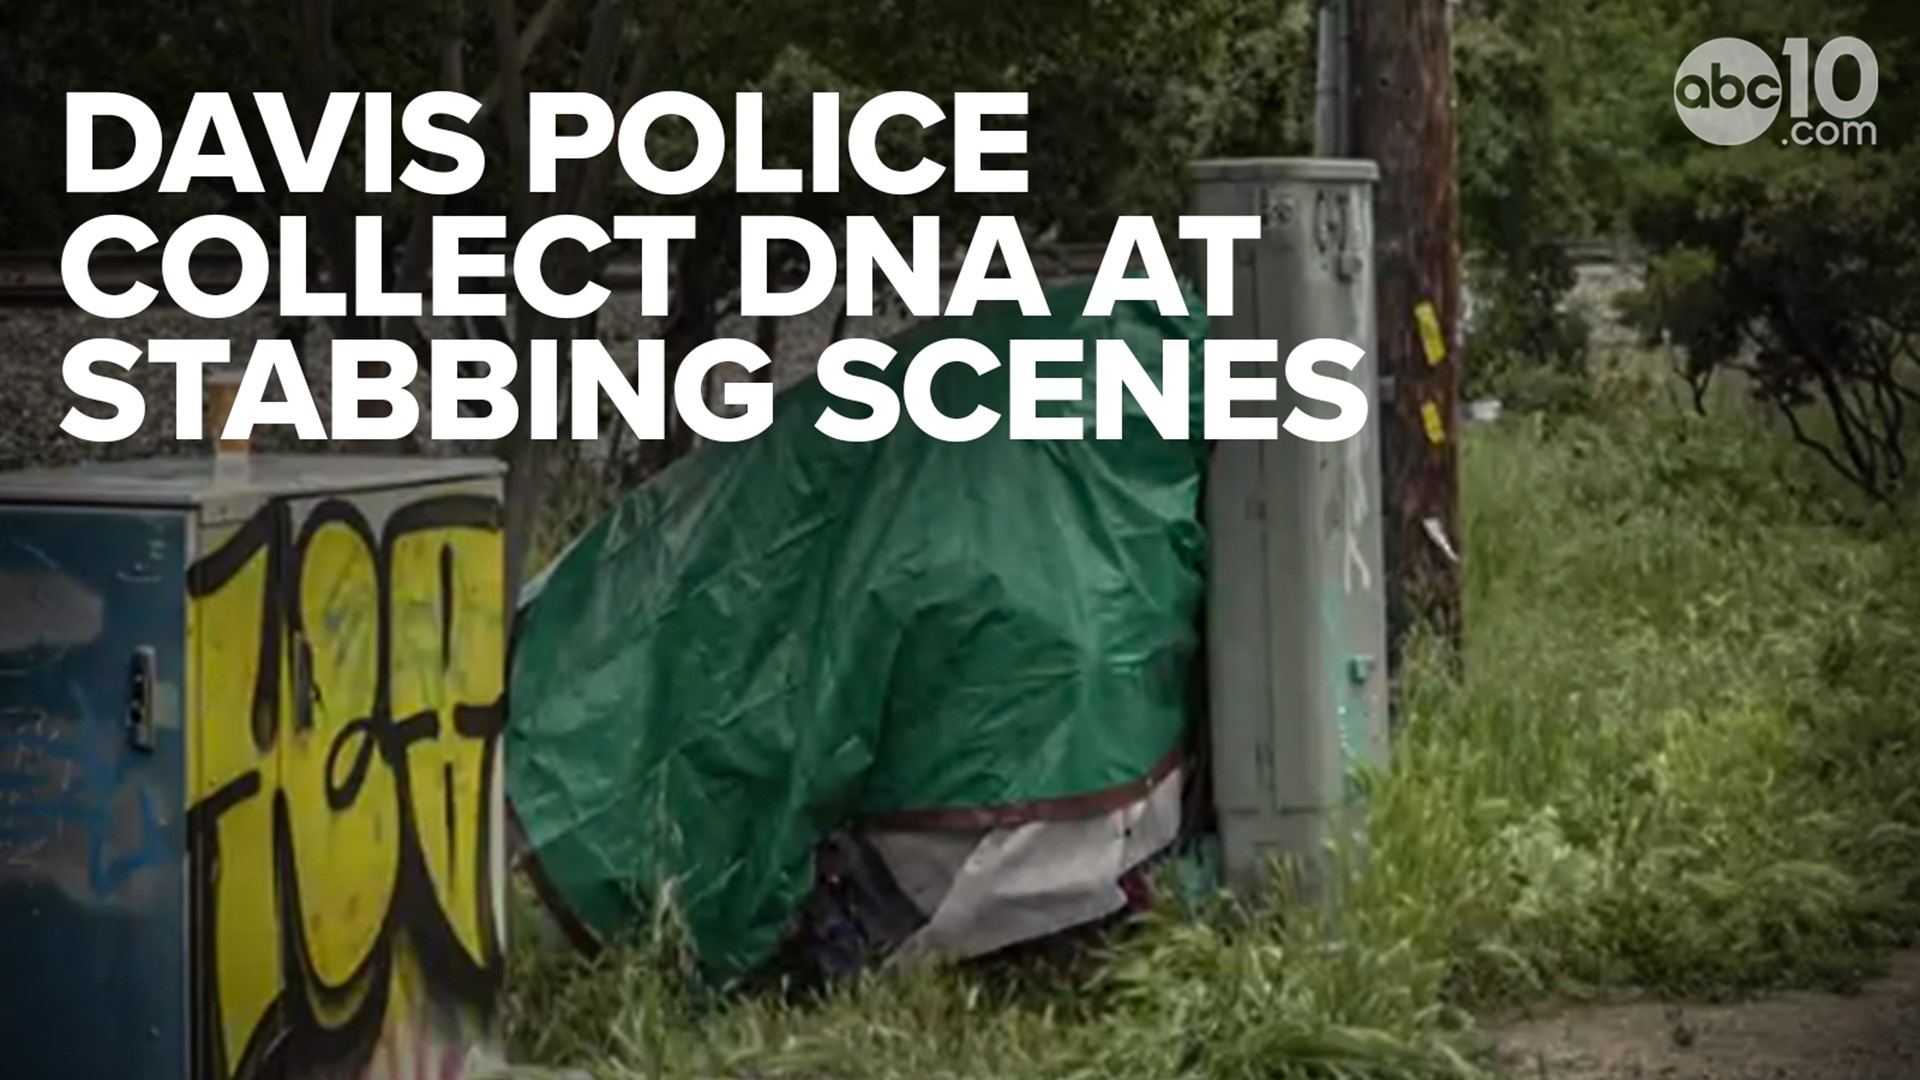 With the stabbing attacks in Davis still going unsolved by police, they are expanding their investigation into a suspect by collecting DNA.